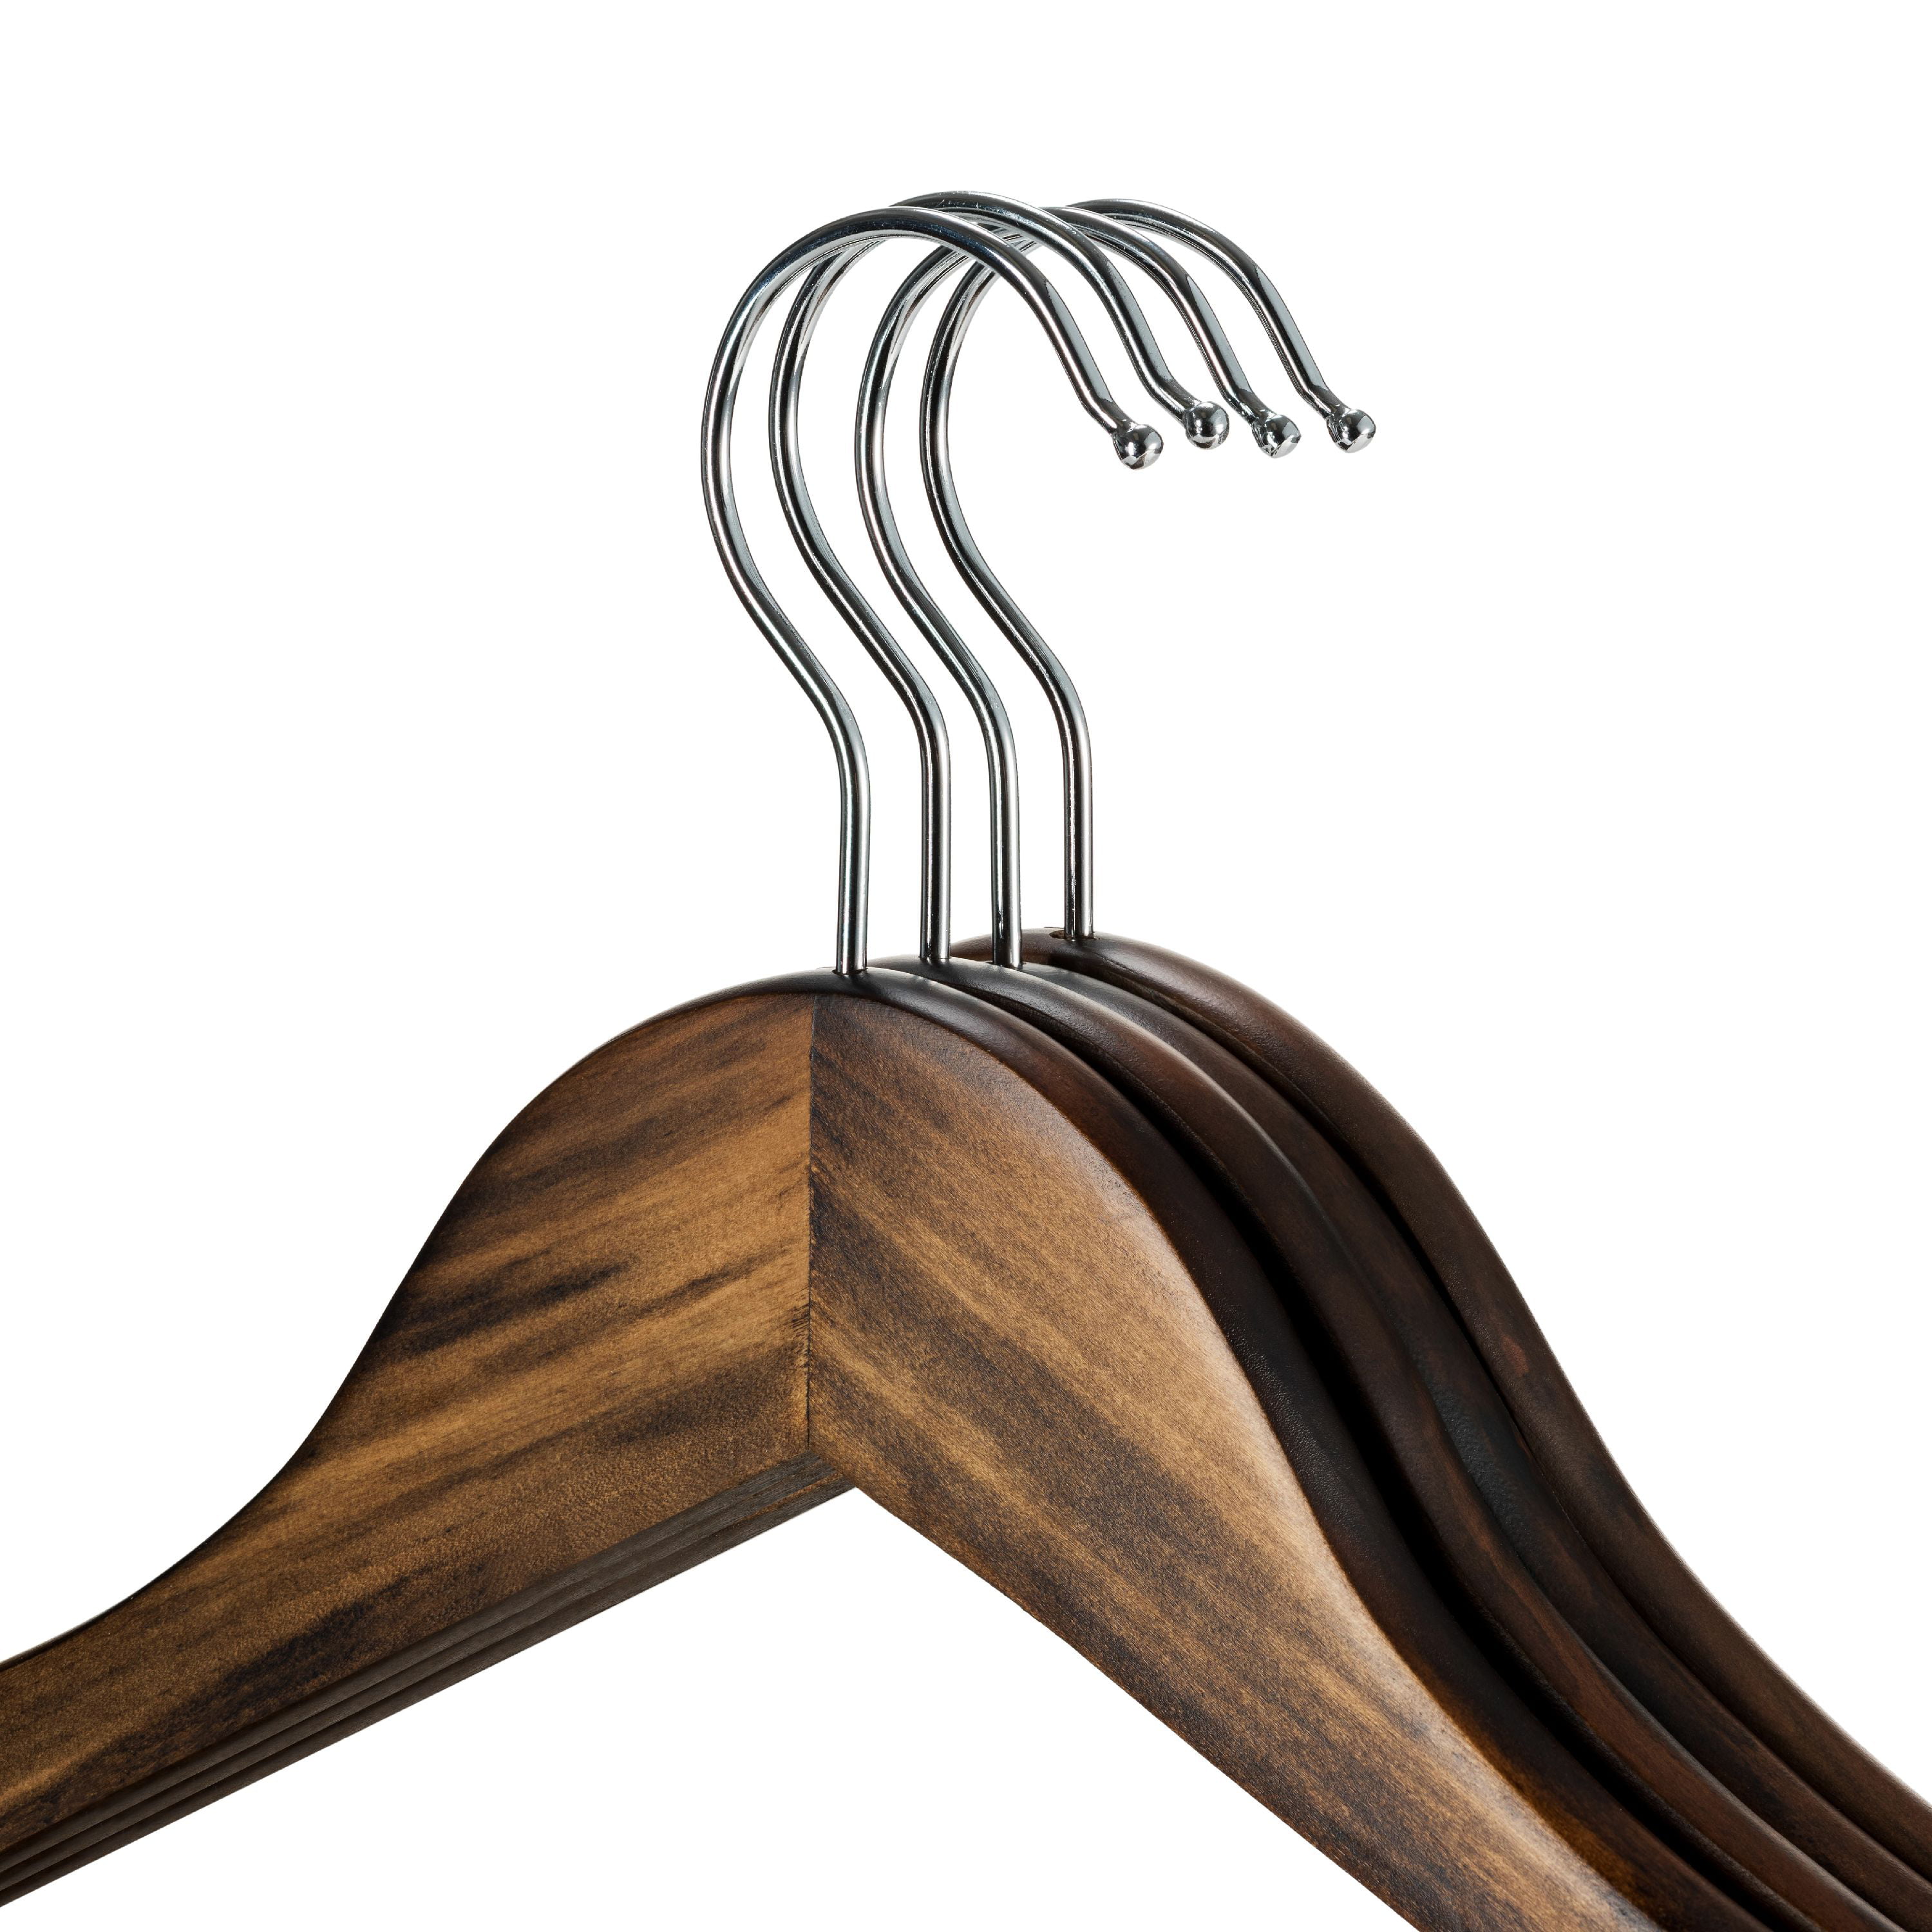 The Hanger Store 5 Black Wooden Suit Hangers Angled Coat Hangers with Notches and Trouser Bar